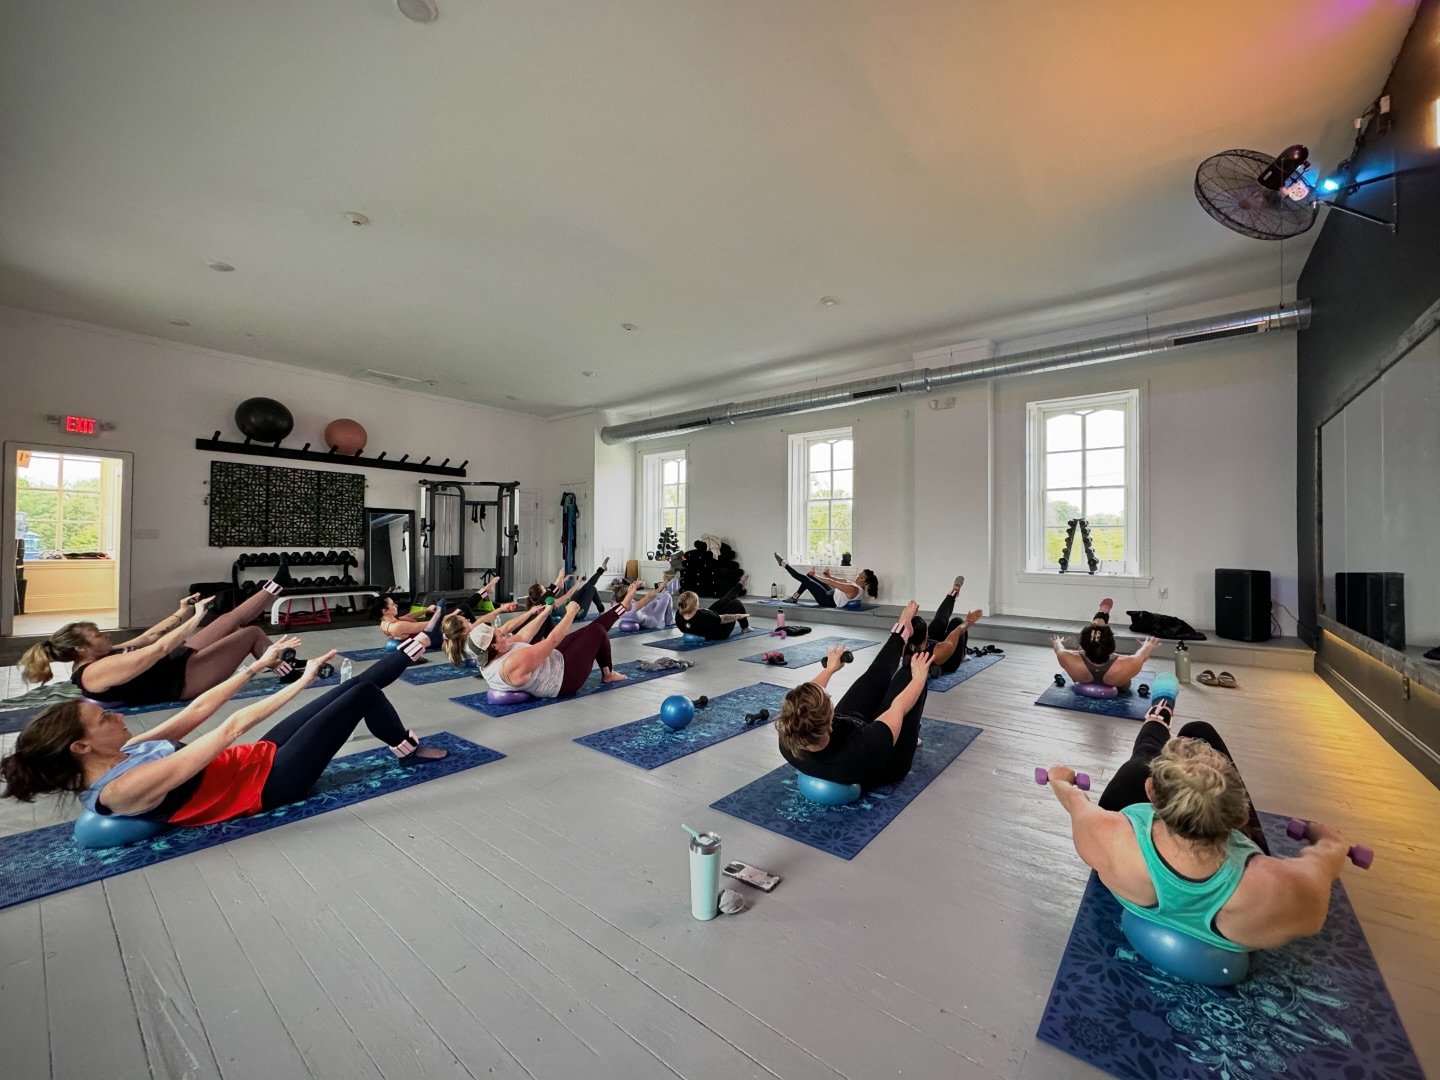 Our rhythm Pilates with Cadie has moved to Monday nights at 615PM but will be coming back Saturdays with @tiffs_era at 7AM June 8th! Until then you can catch it in our 10 Year Anniversary Event happening Friday May 31 530-830 and Saturday June 1 730-